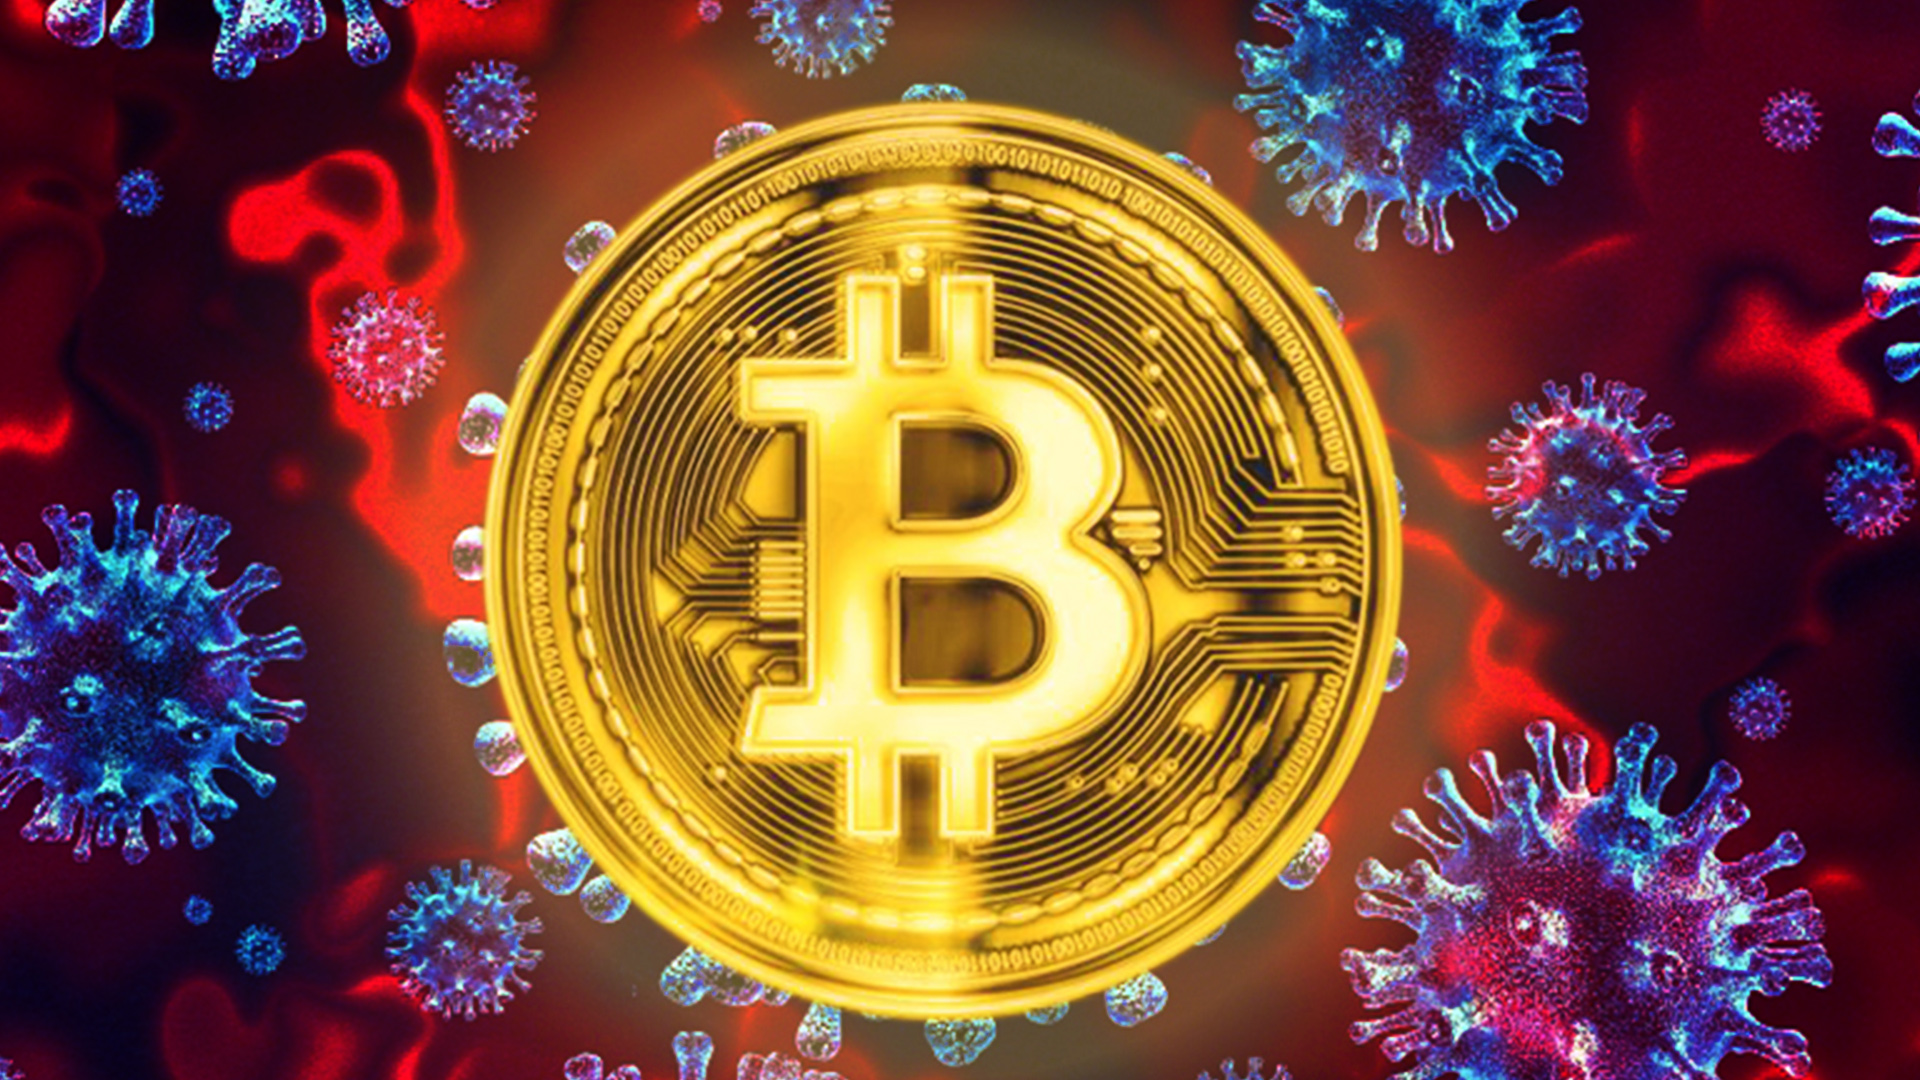 During the coronavirus, are cryptocurrencies suffering or taking advantage of the moment?